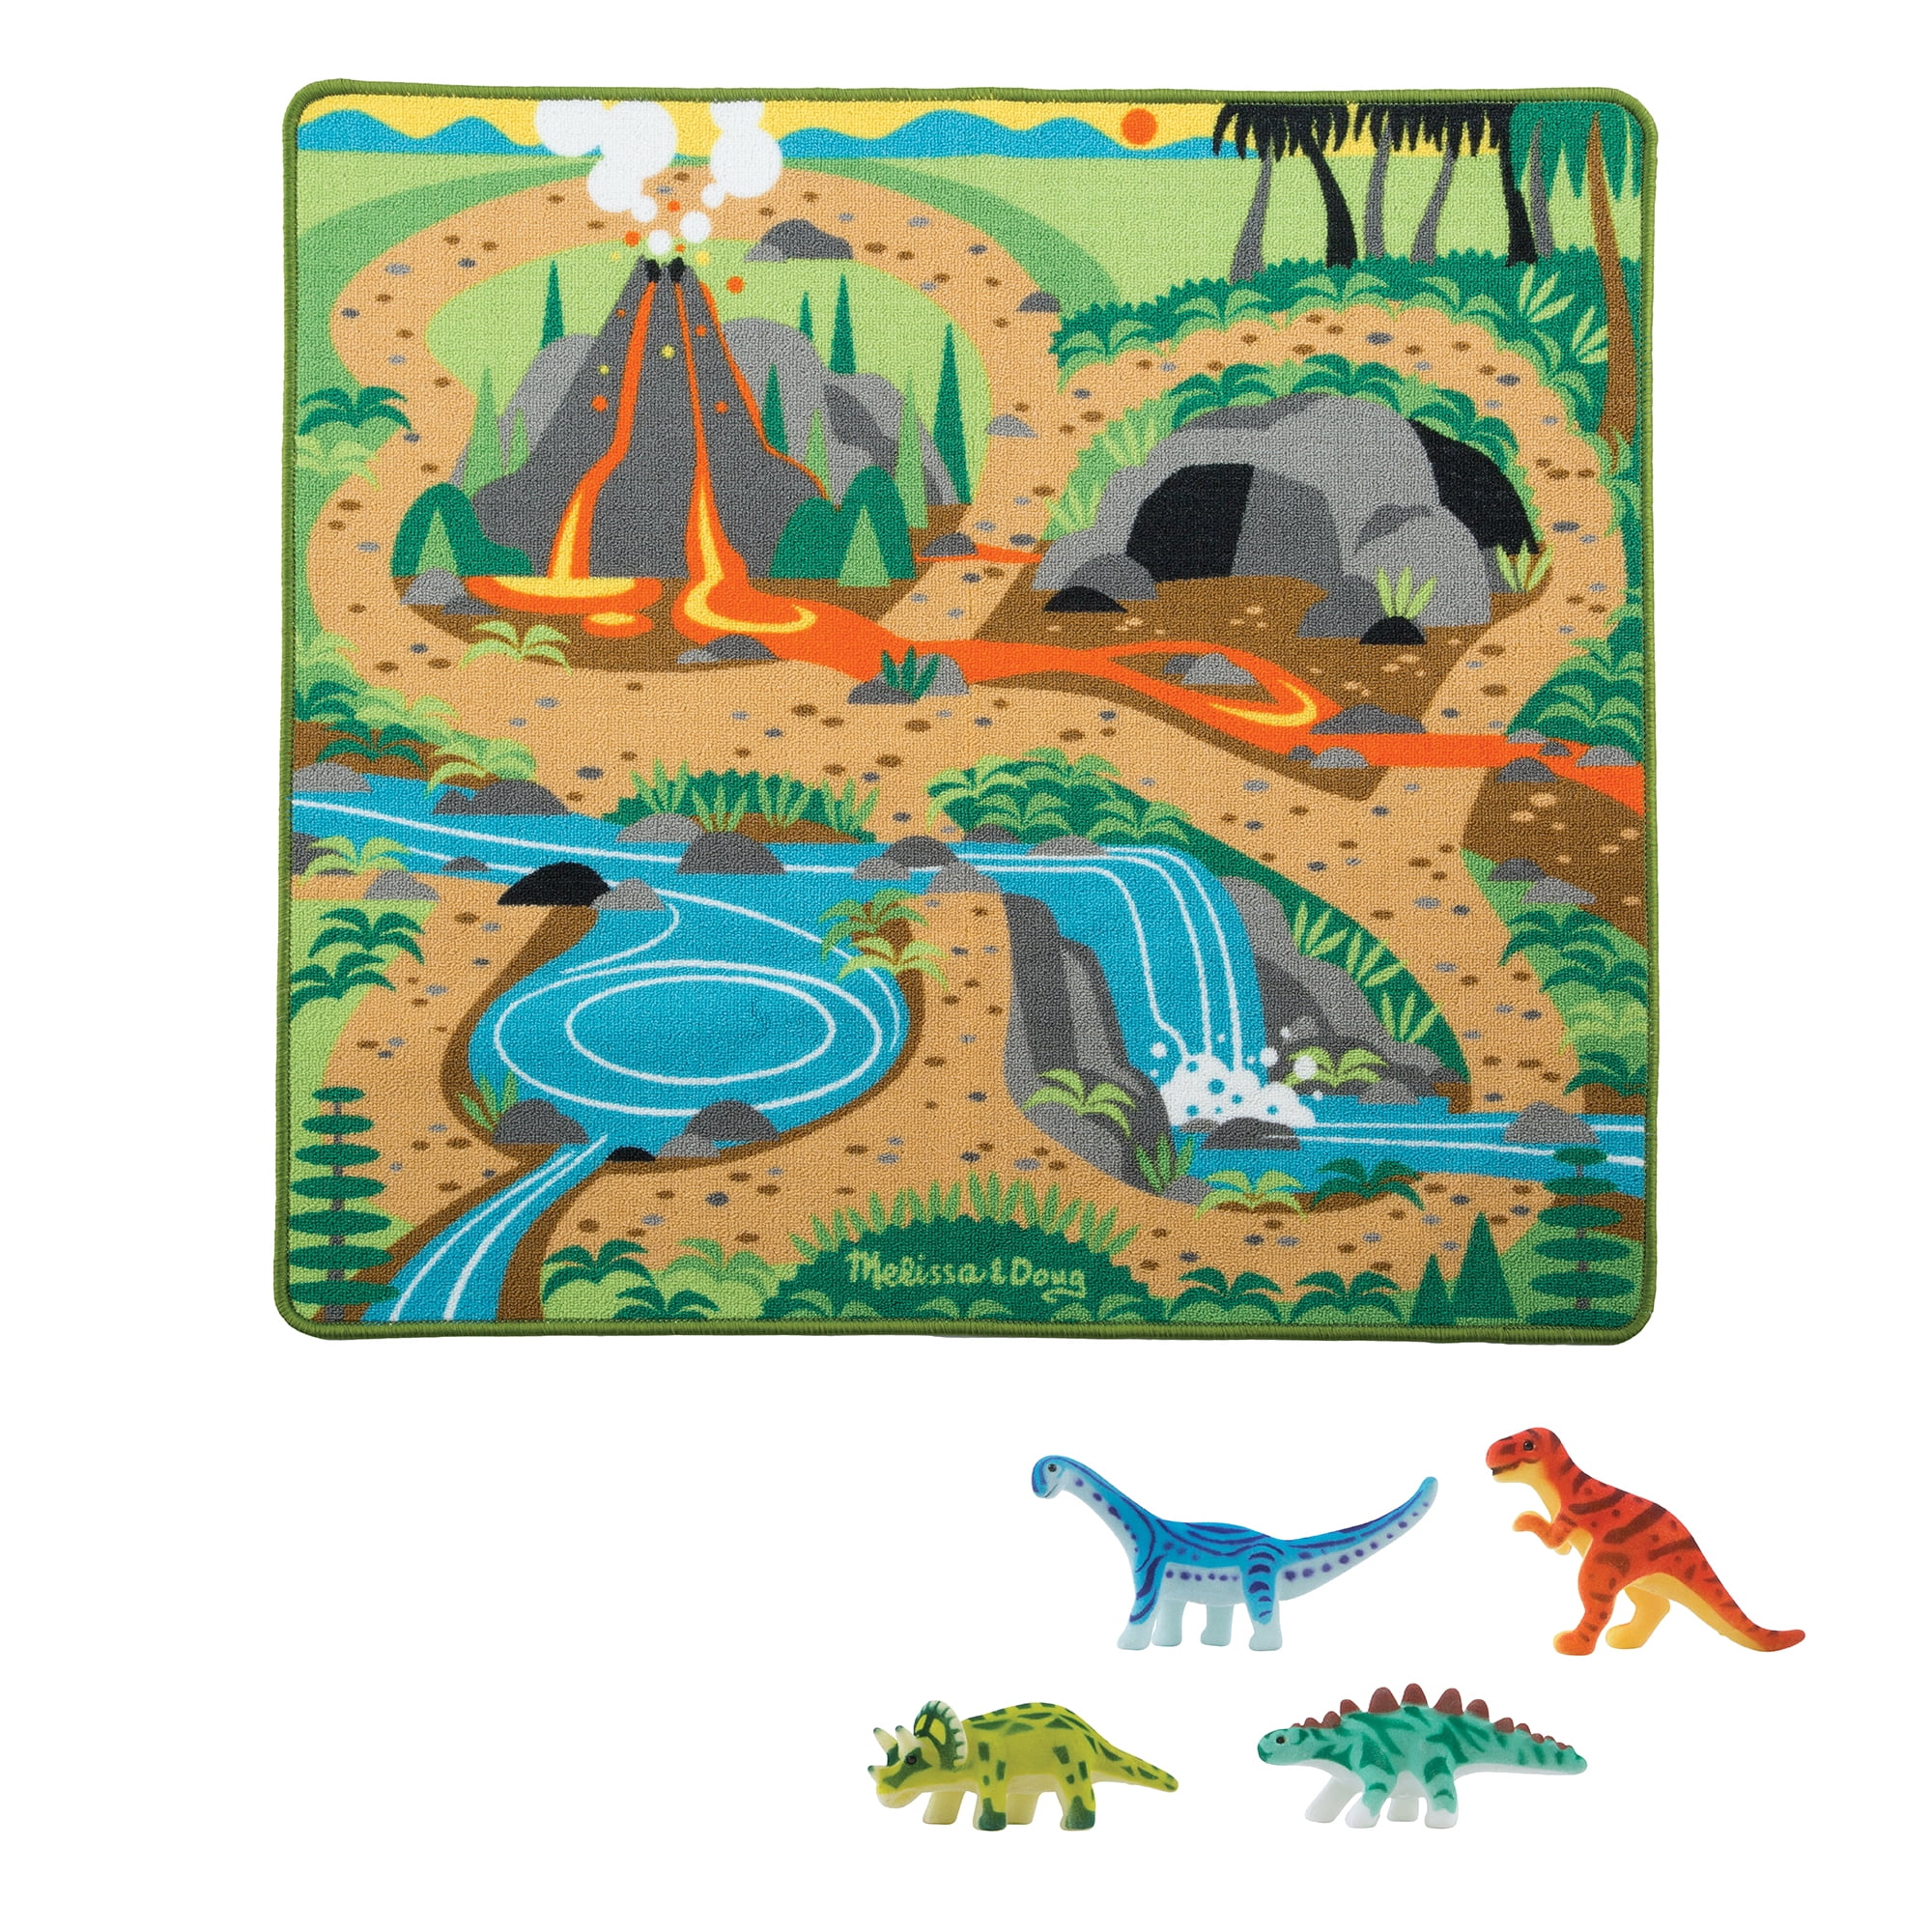 Teach Me Animals of the World Educational Rug 52" x 64" Non-Skid *New* 